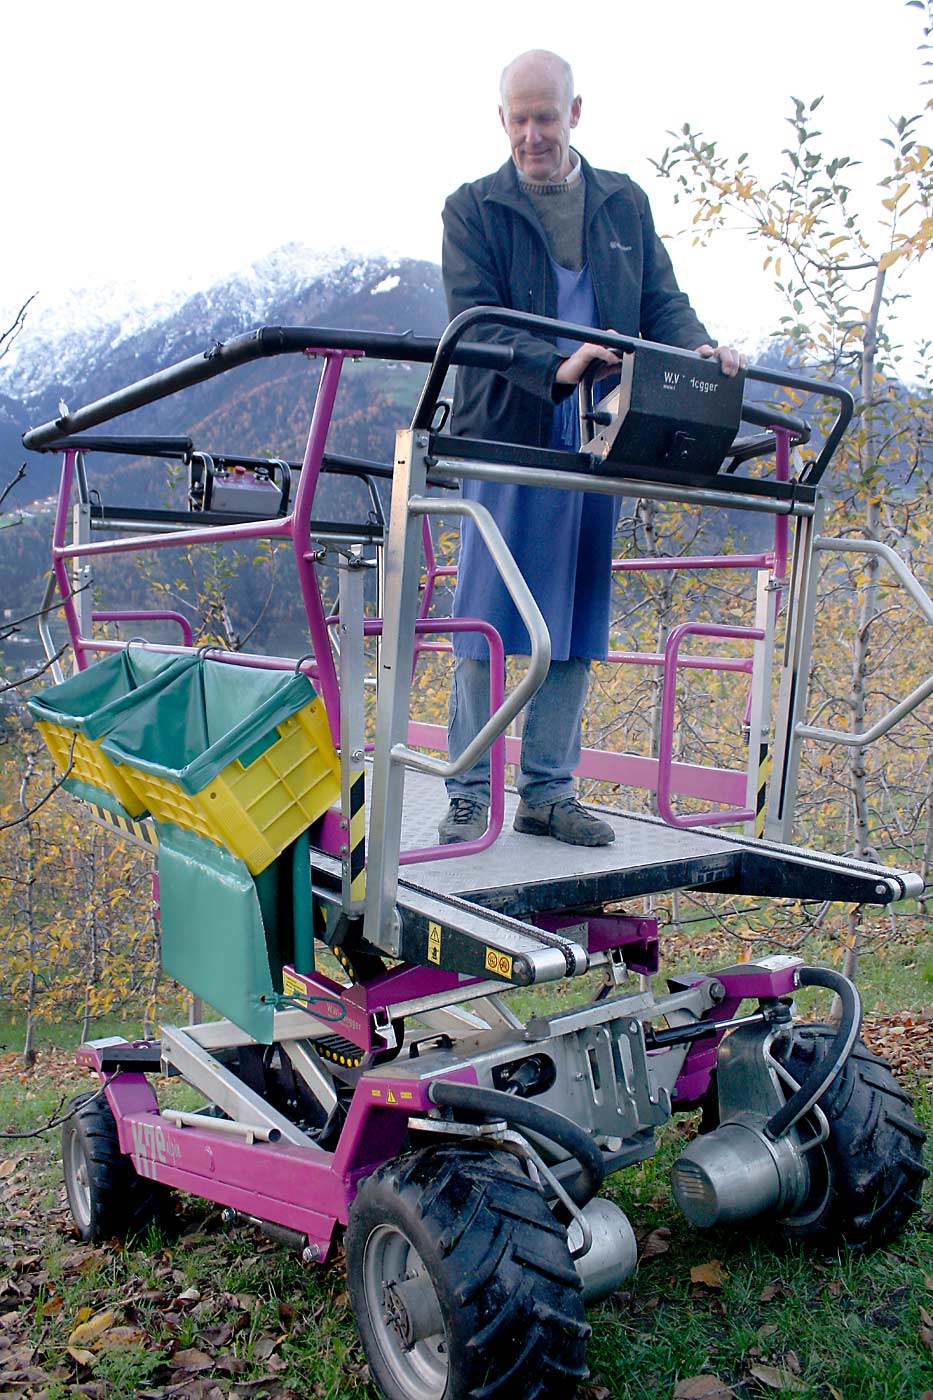 Platforms are especially popular with Italian growers, with newer machines powered by electrical propulsion. This four-wheel, battery-powered platform, designed by Windegger, is one example used in steep South Tyrol orchards. (Richard Lehnert/Good Fruit Grower)